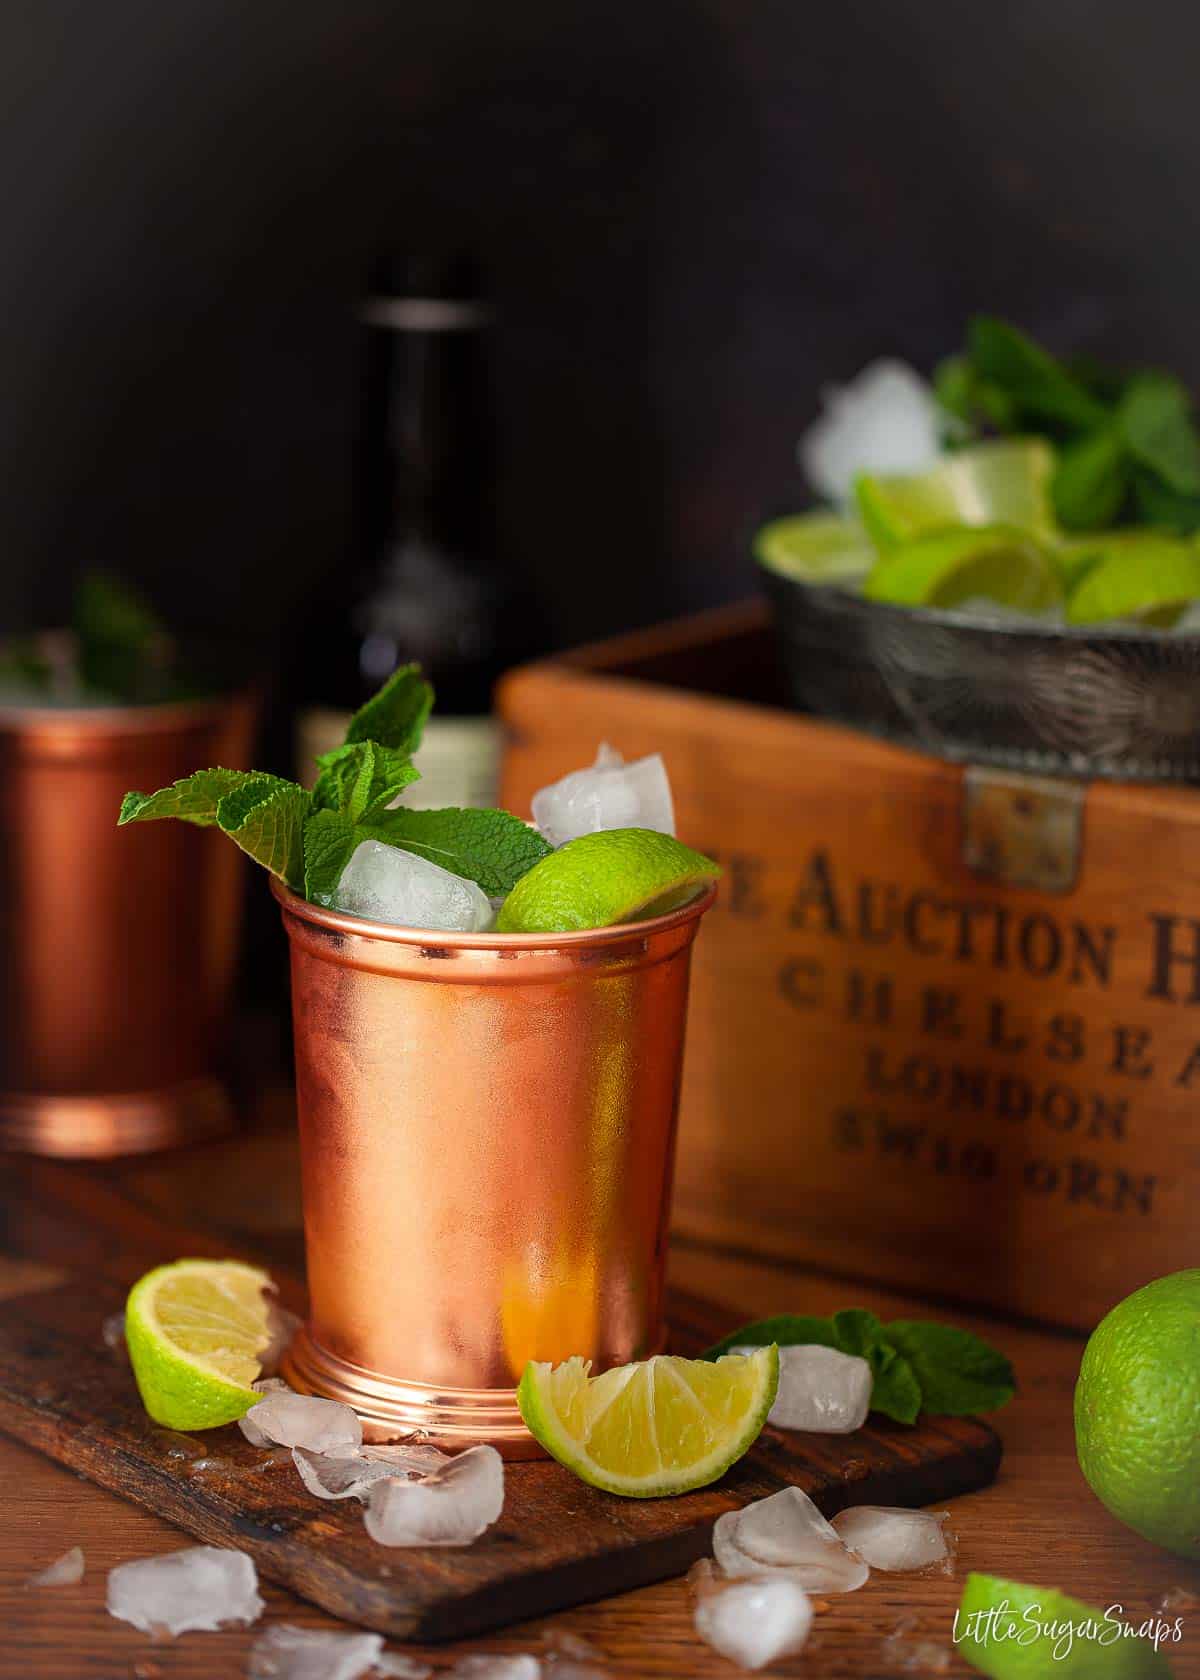 A London mule in a copper mug with lime and mint garnish and ice scattered around.